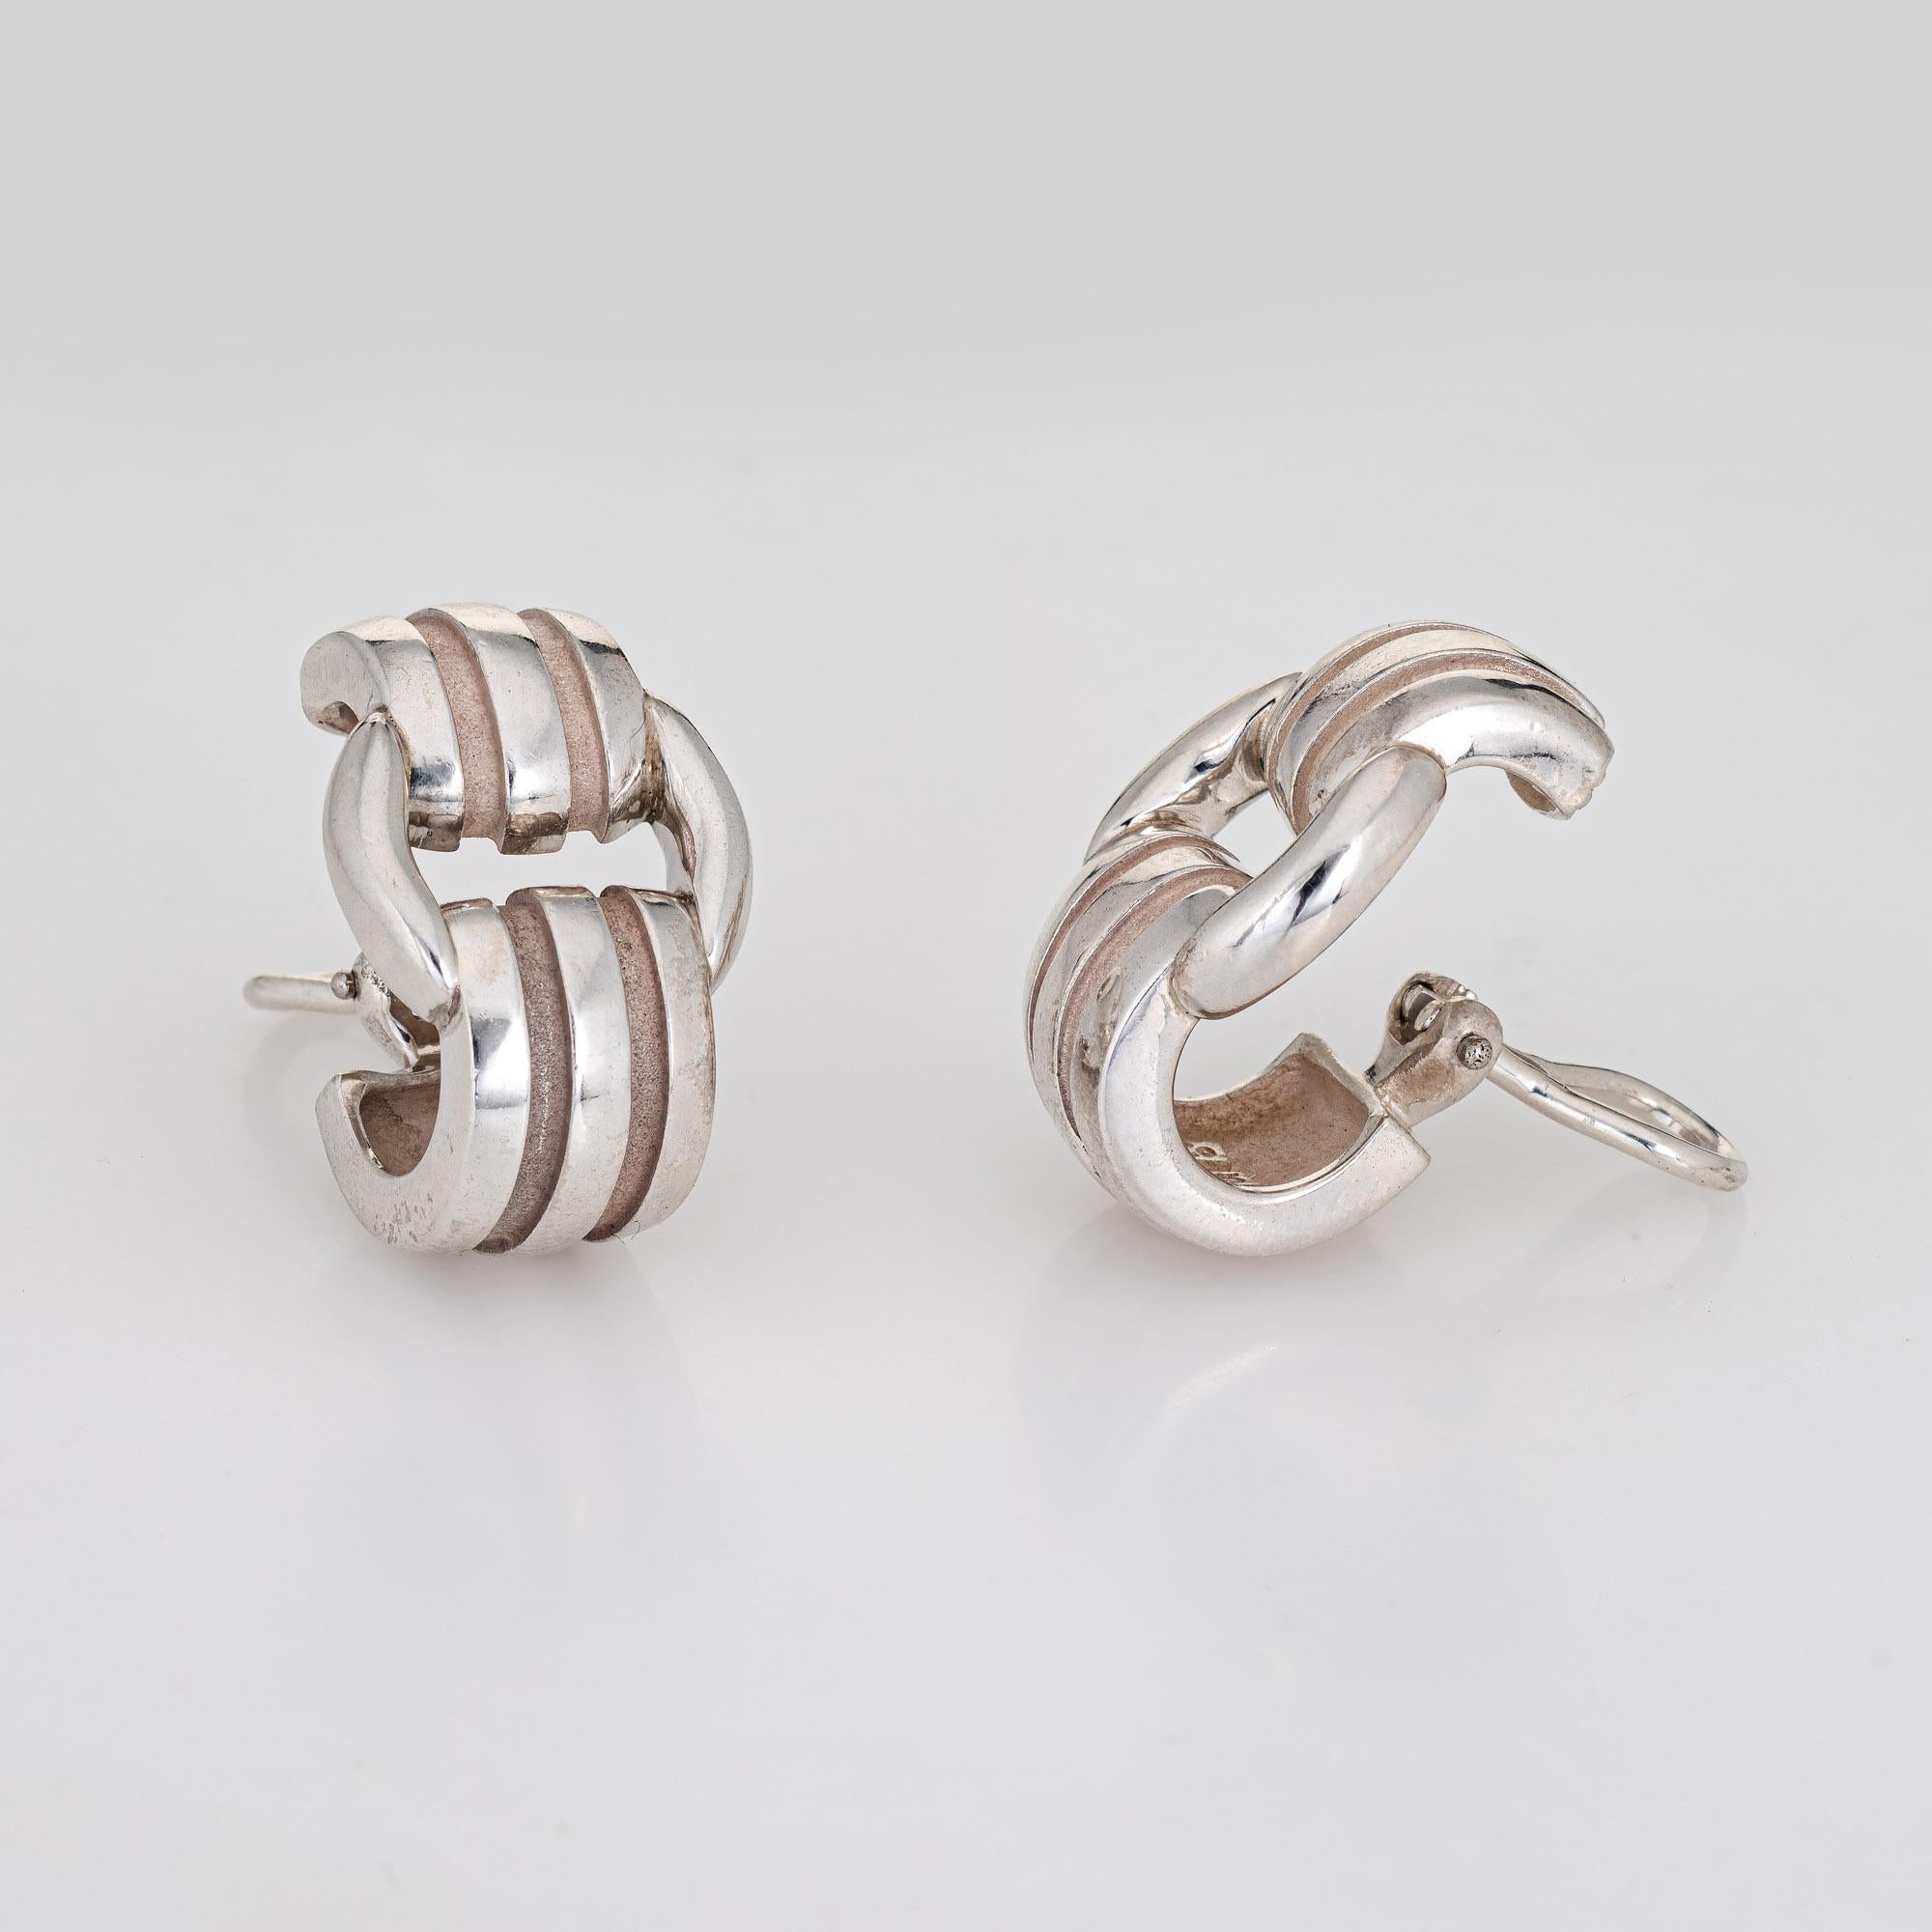 Finely detailed pair of vintage Tiffany & Co Atlas earrings (circa 1995) crafted in sterling silver. 

From the popular Atlas collection, the stylish earrings are crafted in sterling silver. The retired earrings are no longer available for sale at